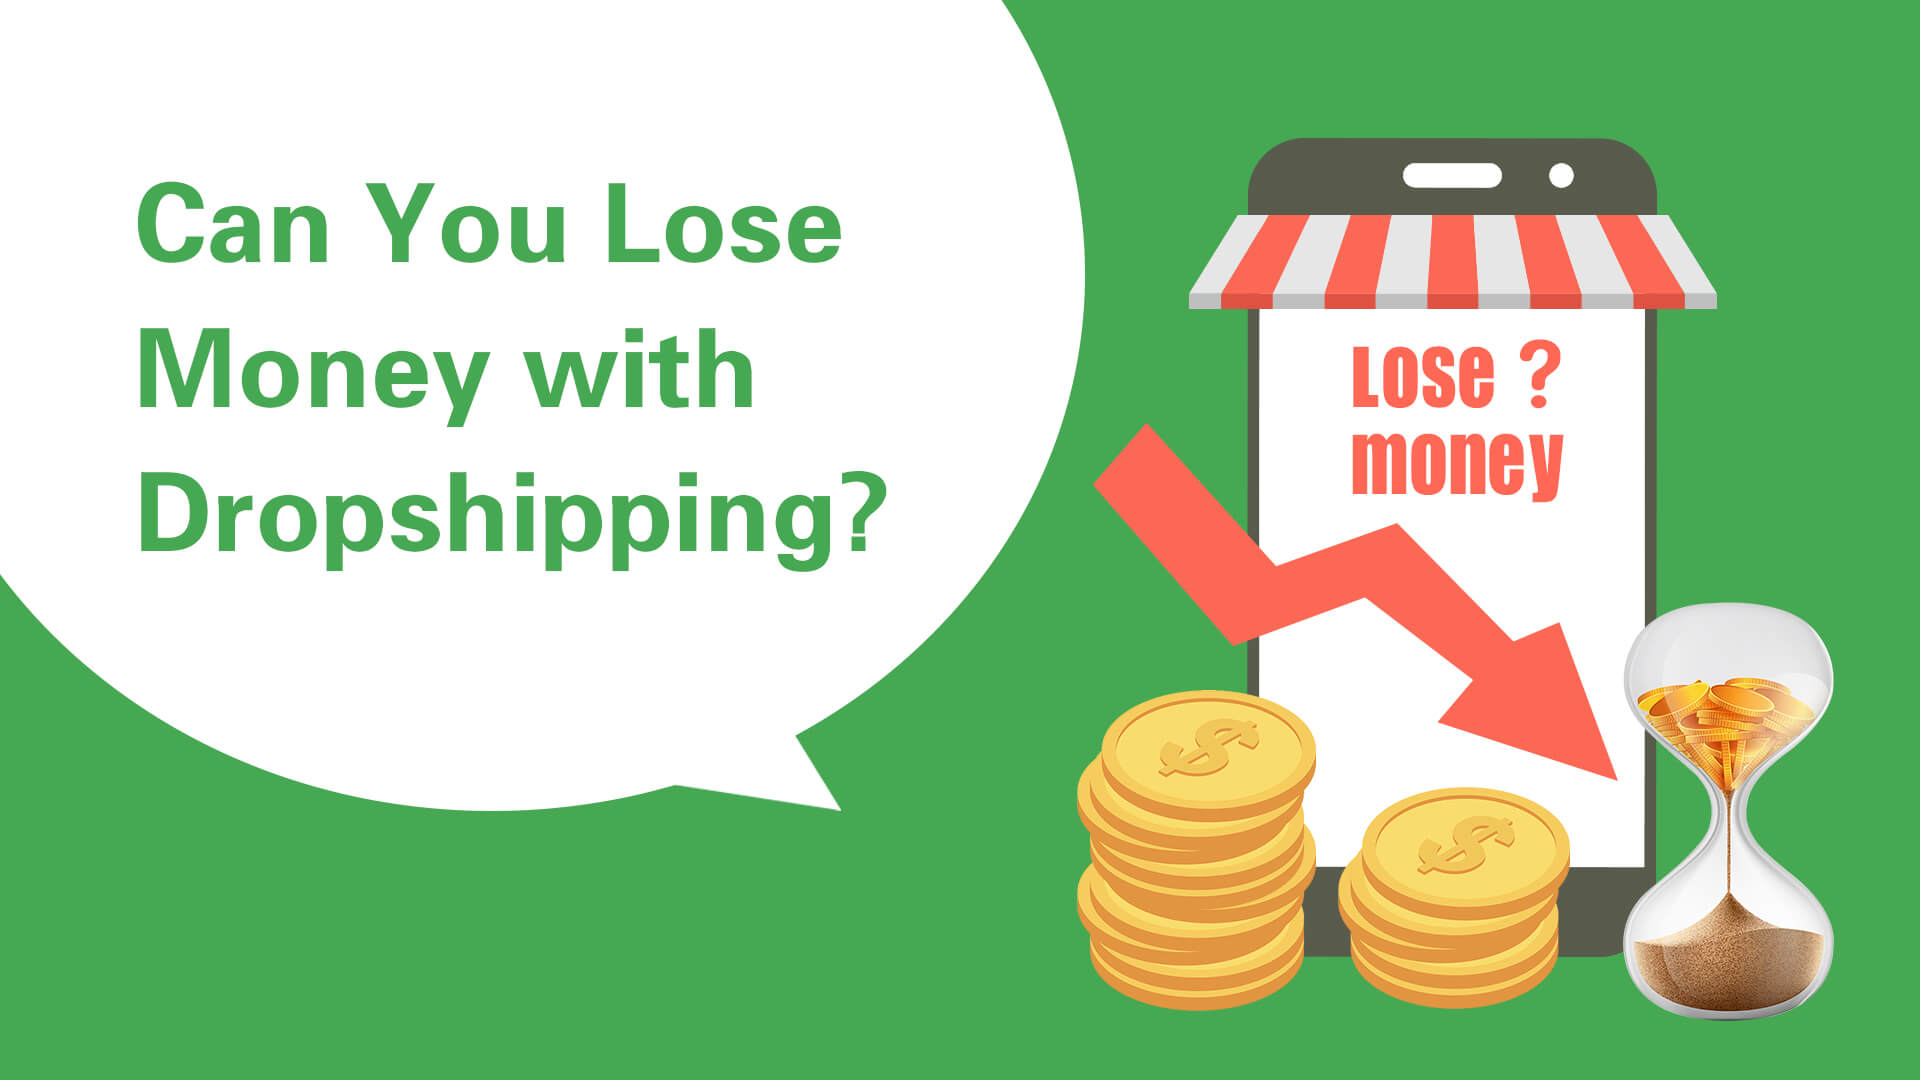 How to Offer Free Shipping (Without Losing Money)